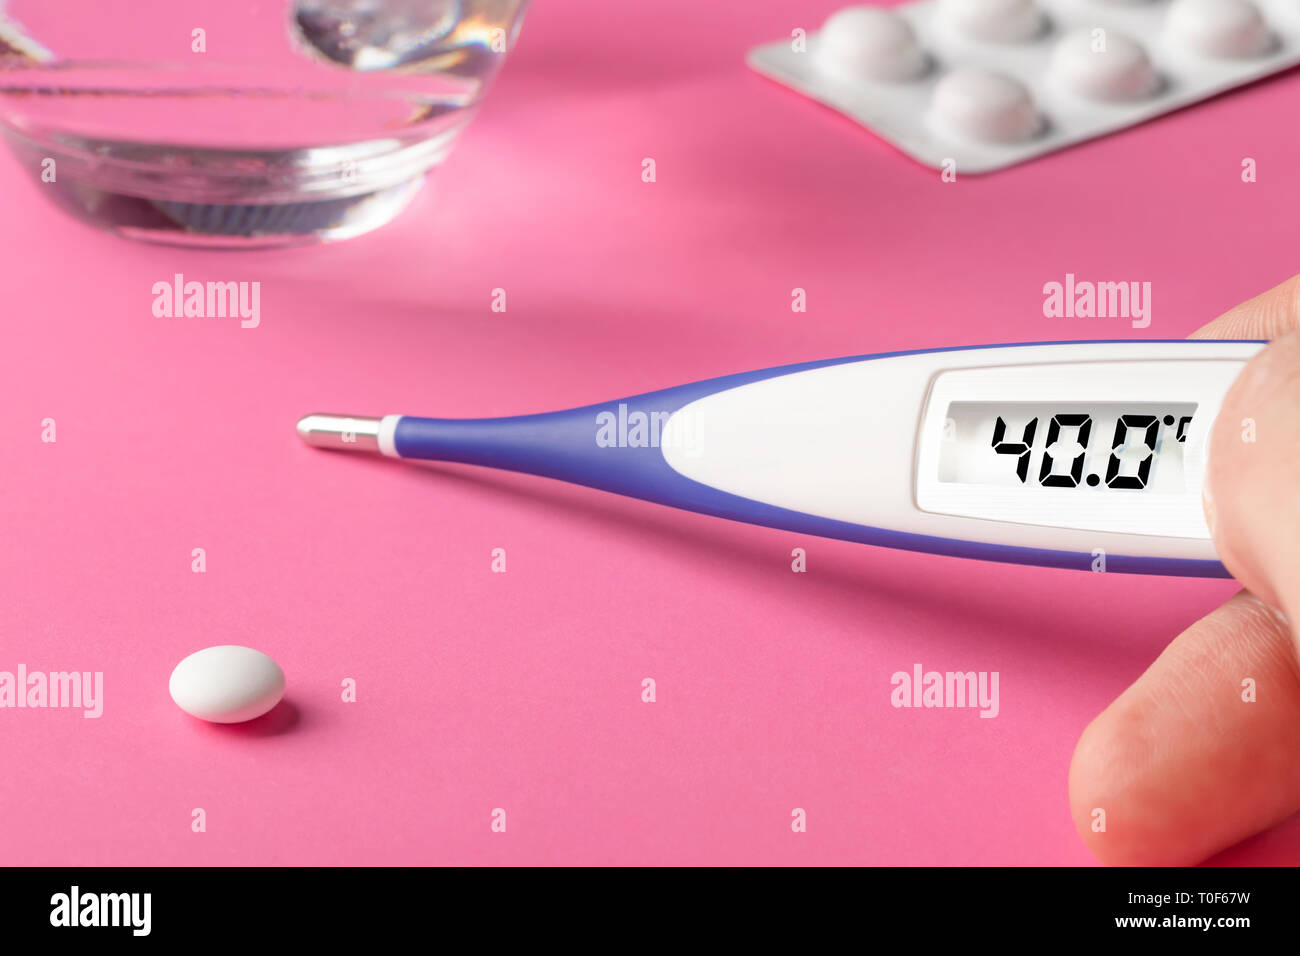 Electronic thermometer and pills on a pink background. High temperature 40 degrees Celsius on display. Glass cup with water. Copy space. Stock Photo